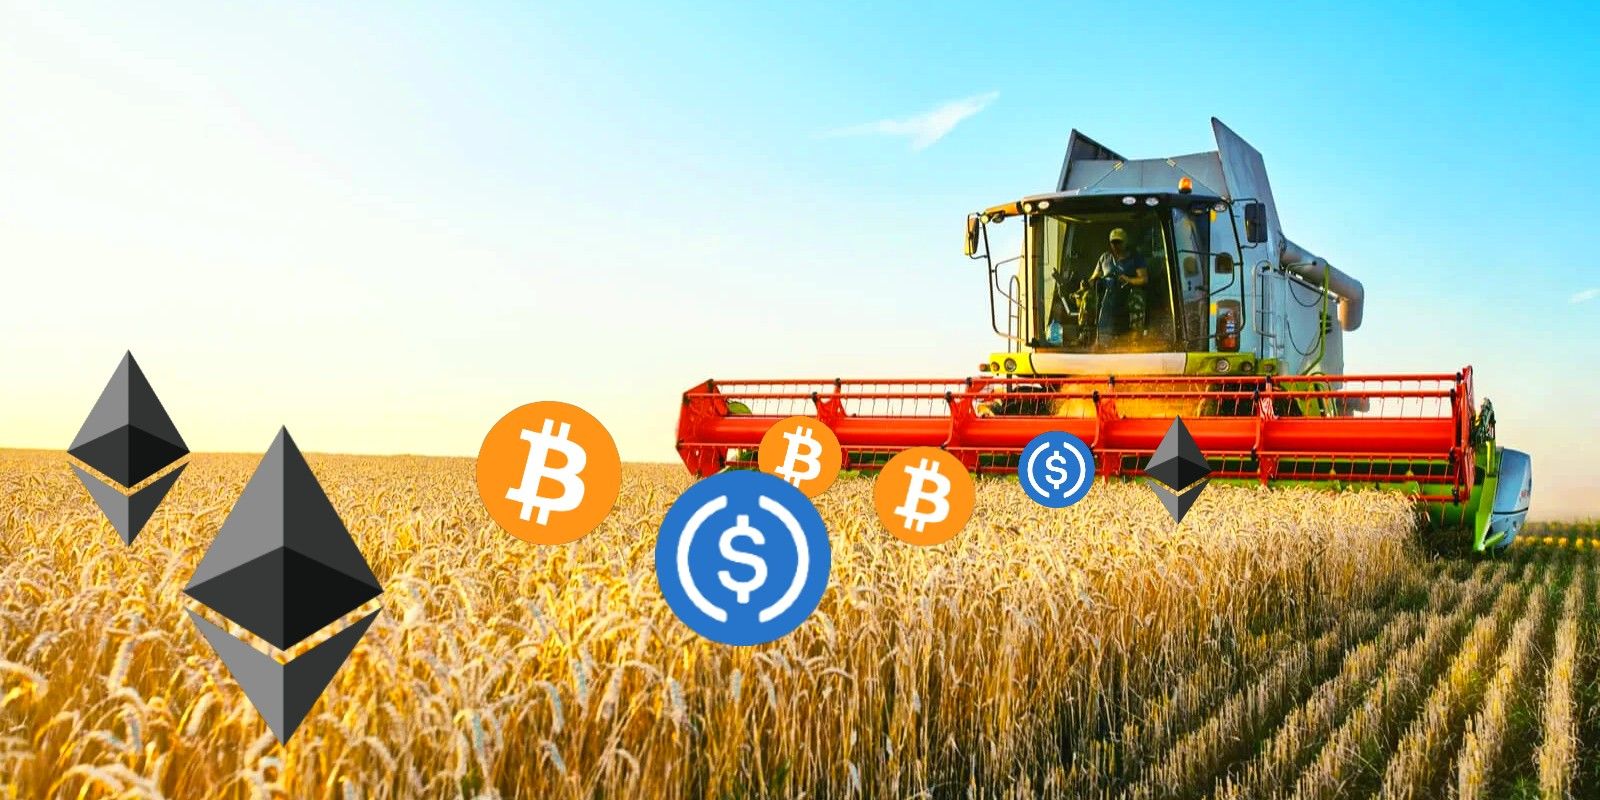 Wheat fields being harvested with ETH, BTC, and USDC logos